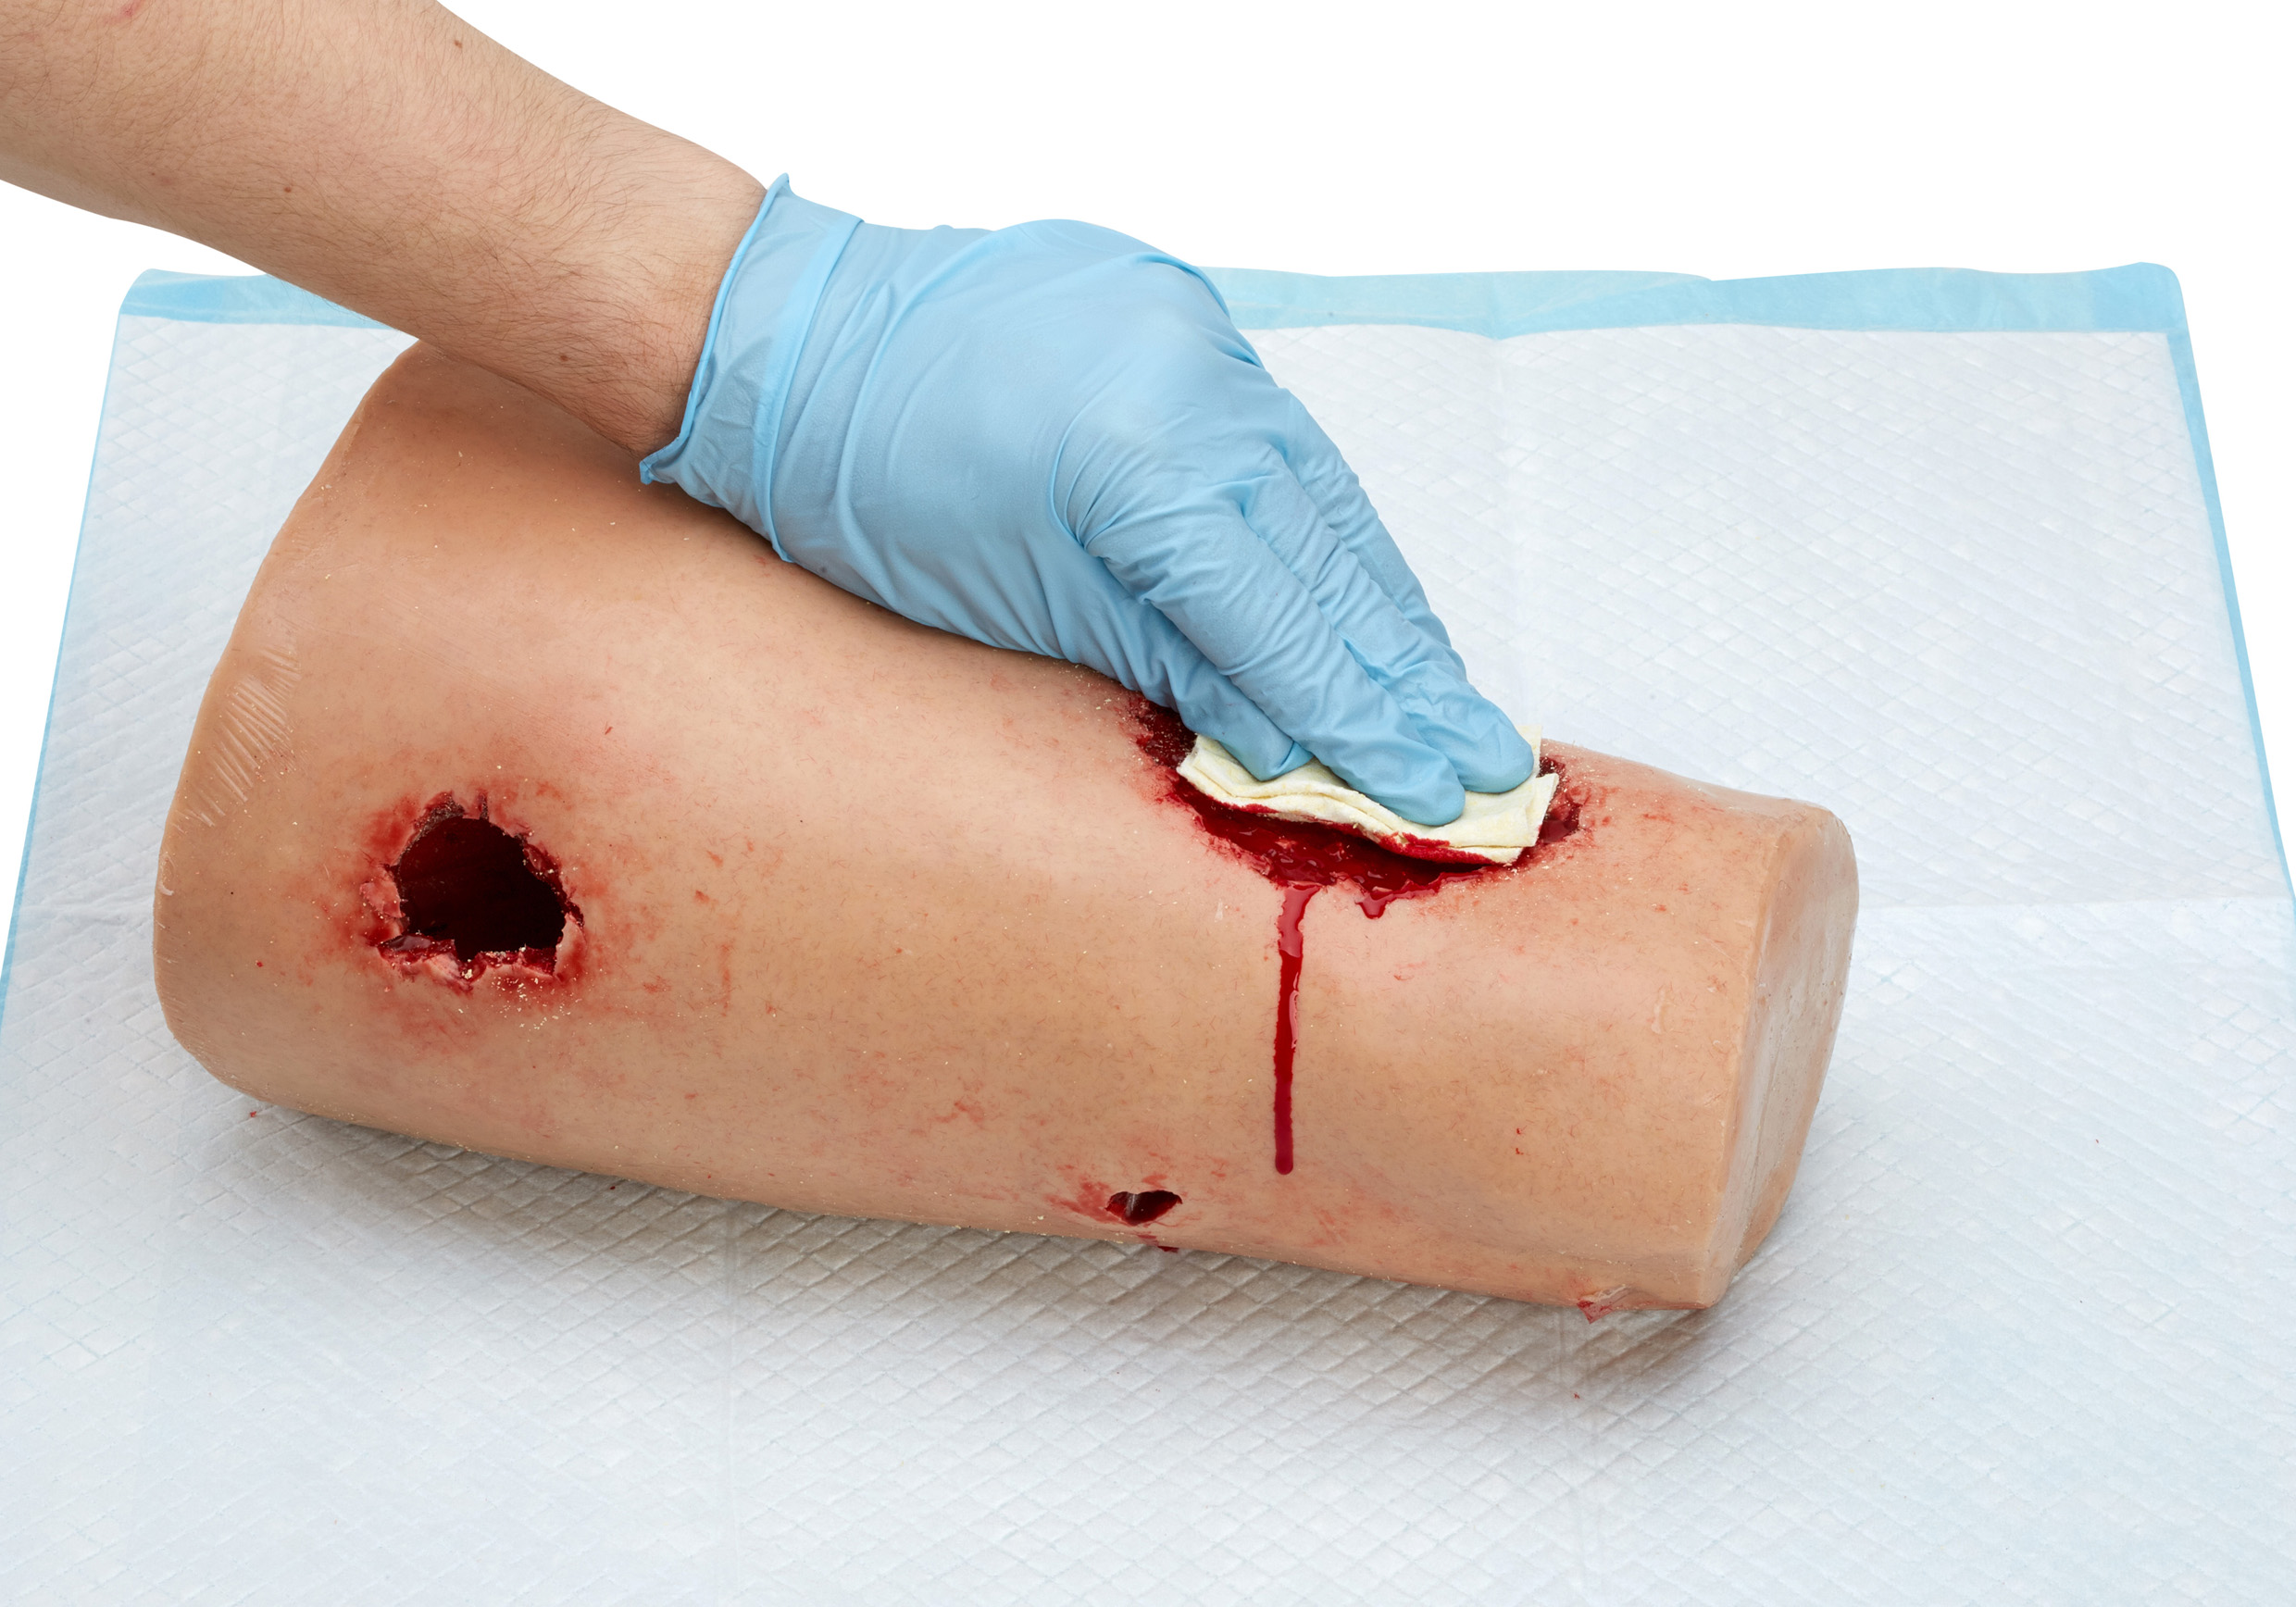 Bullet Wound Packing Trainer Tunneling Wound Assessment and Wound Packing E...